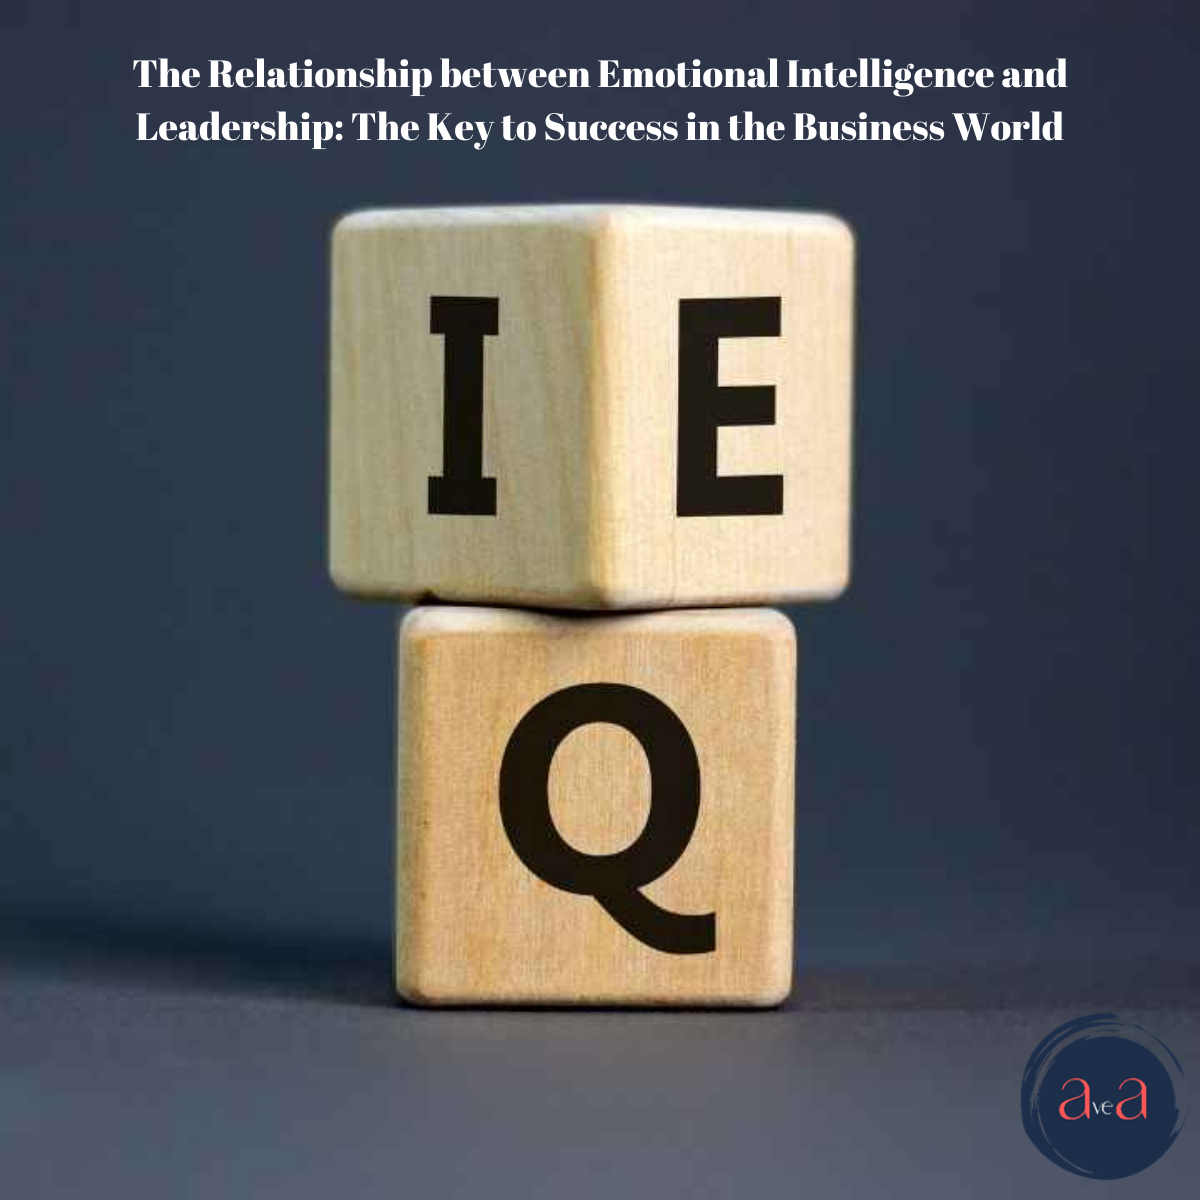 The Relationship between Emotional Intelligence and Leadership: The Key to Success in the Business World